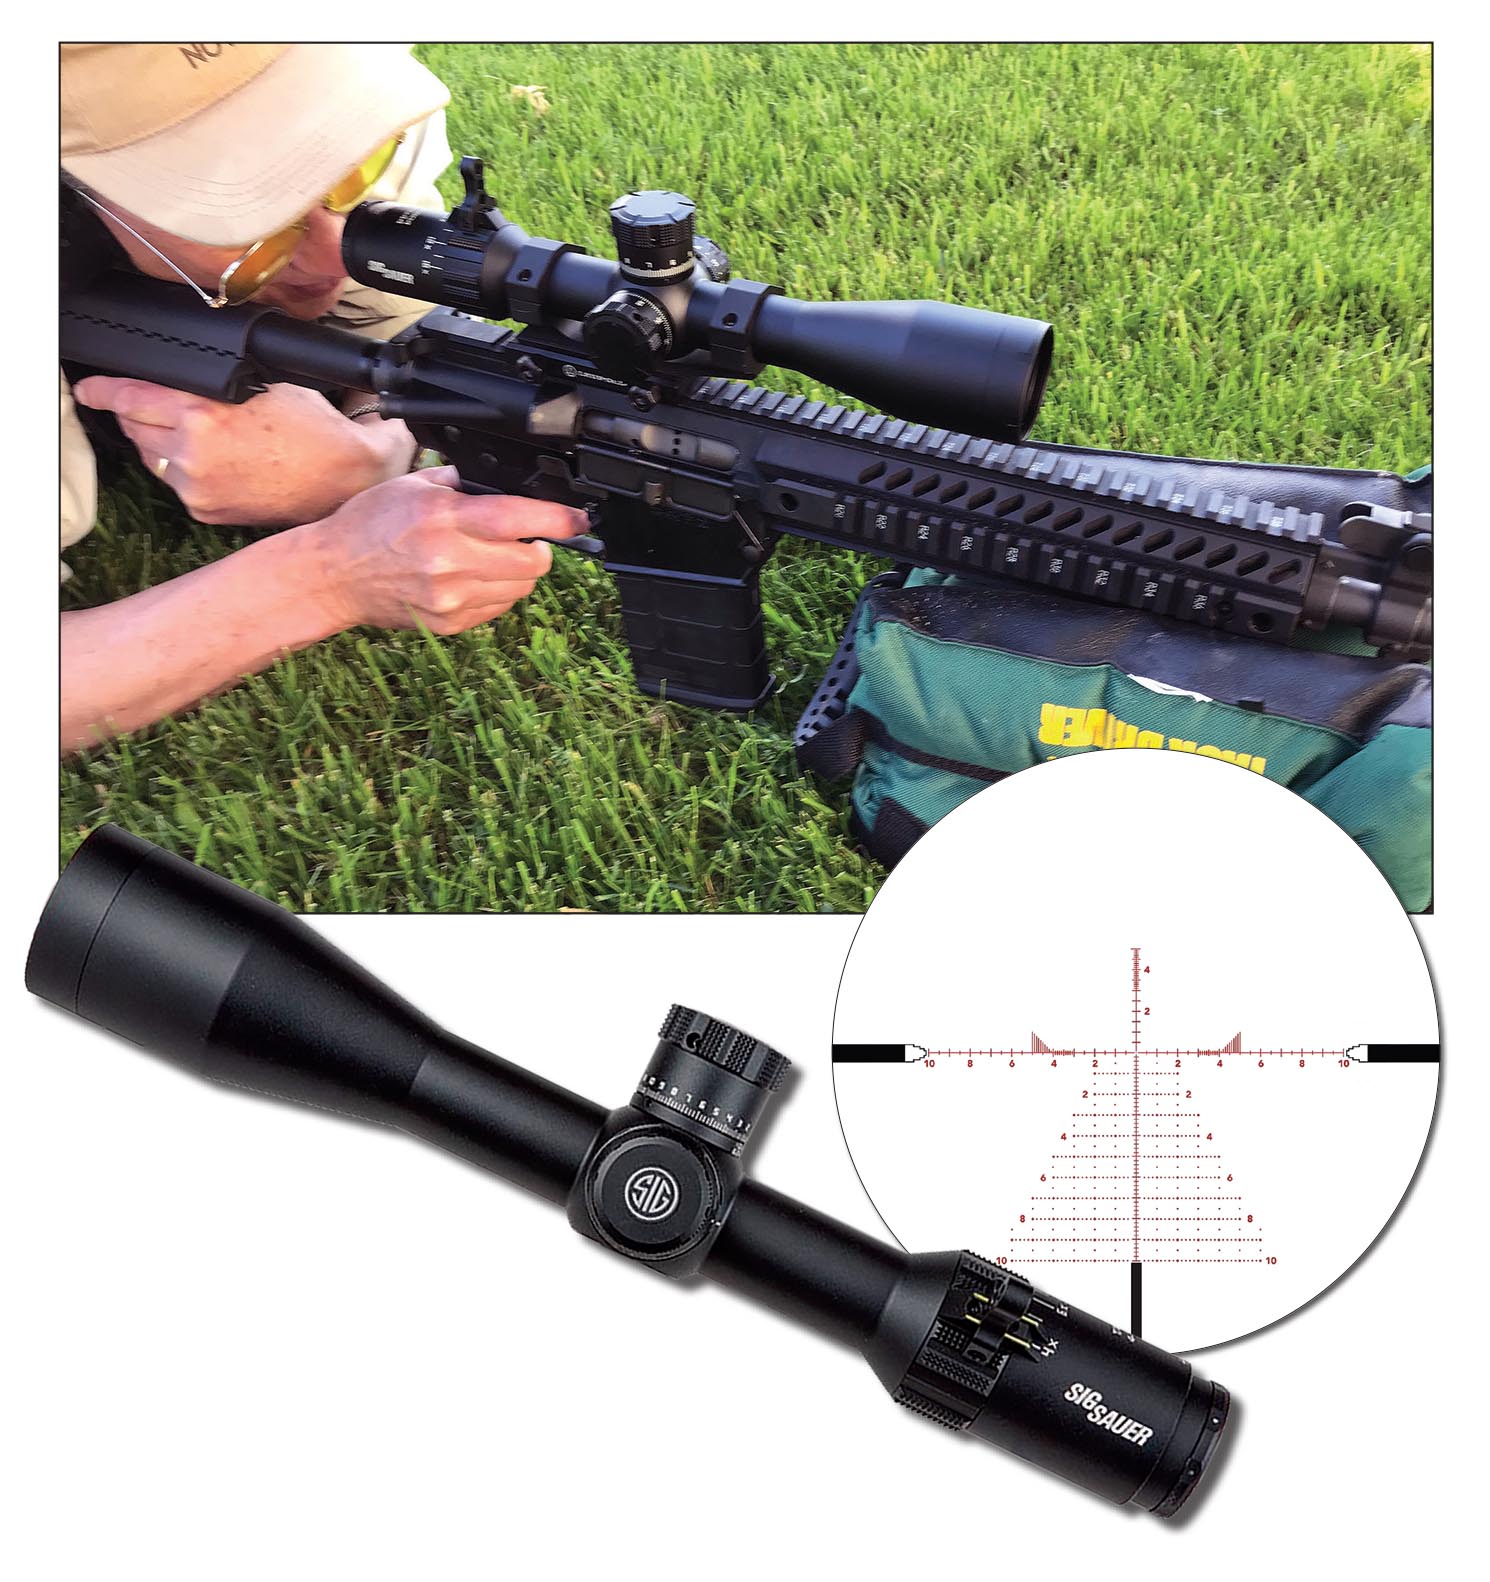 TANGO4 riflescopes are made in the Philippines. John’s test scope featured the MRAD DEV-L reticle.